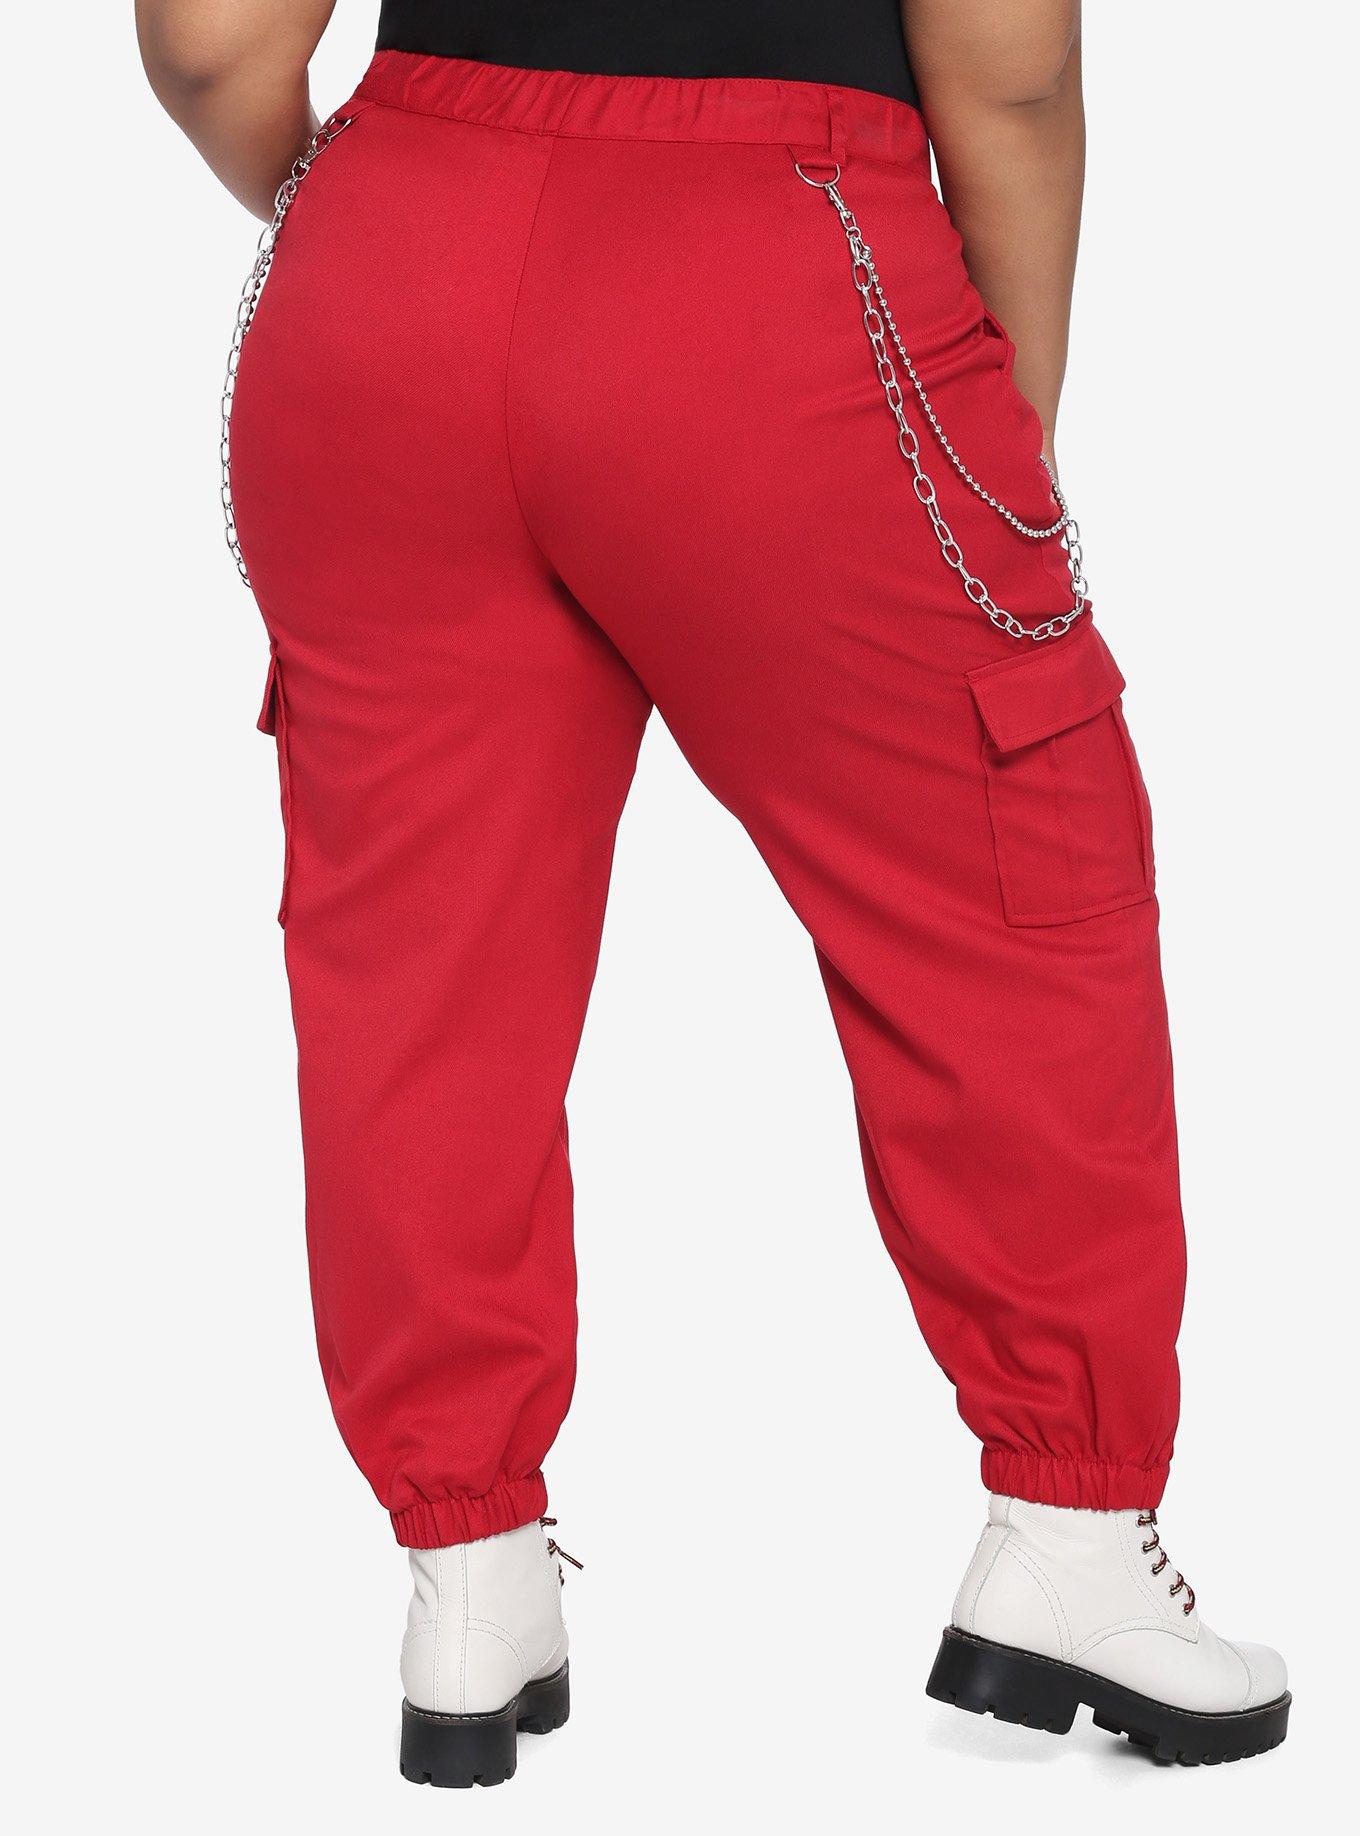 Hot Topic Red Chain Hardware Cargo Jogger Pants Plus Size 0 Nwot